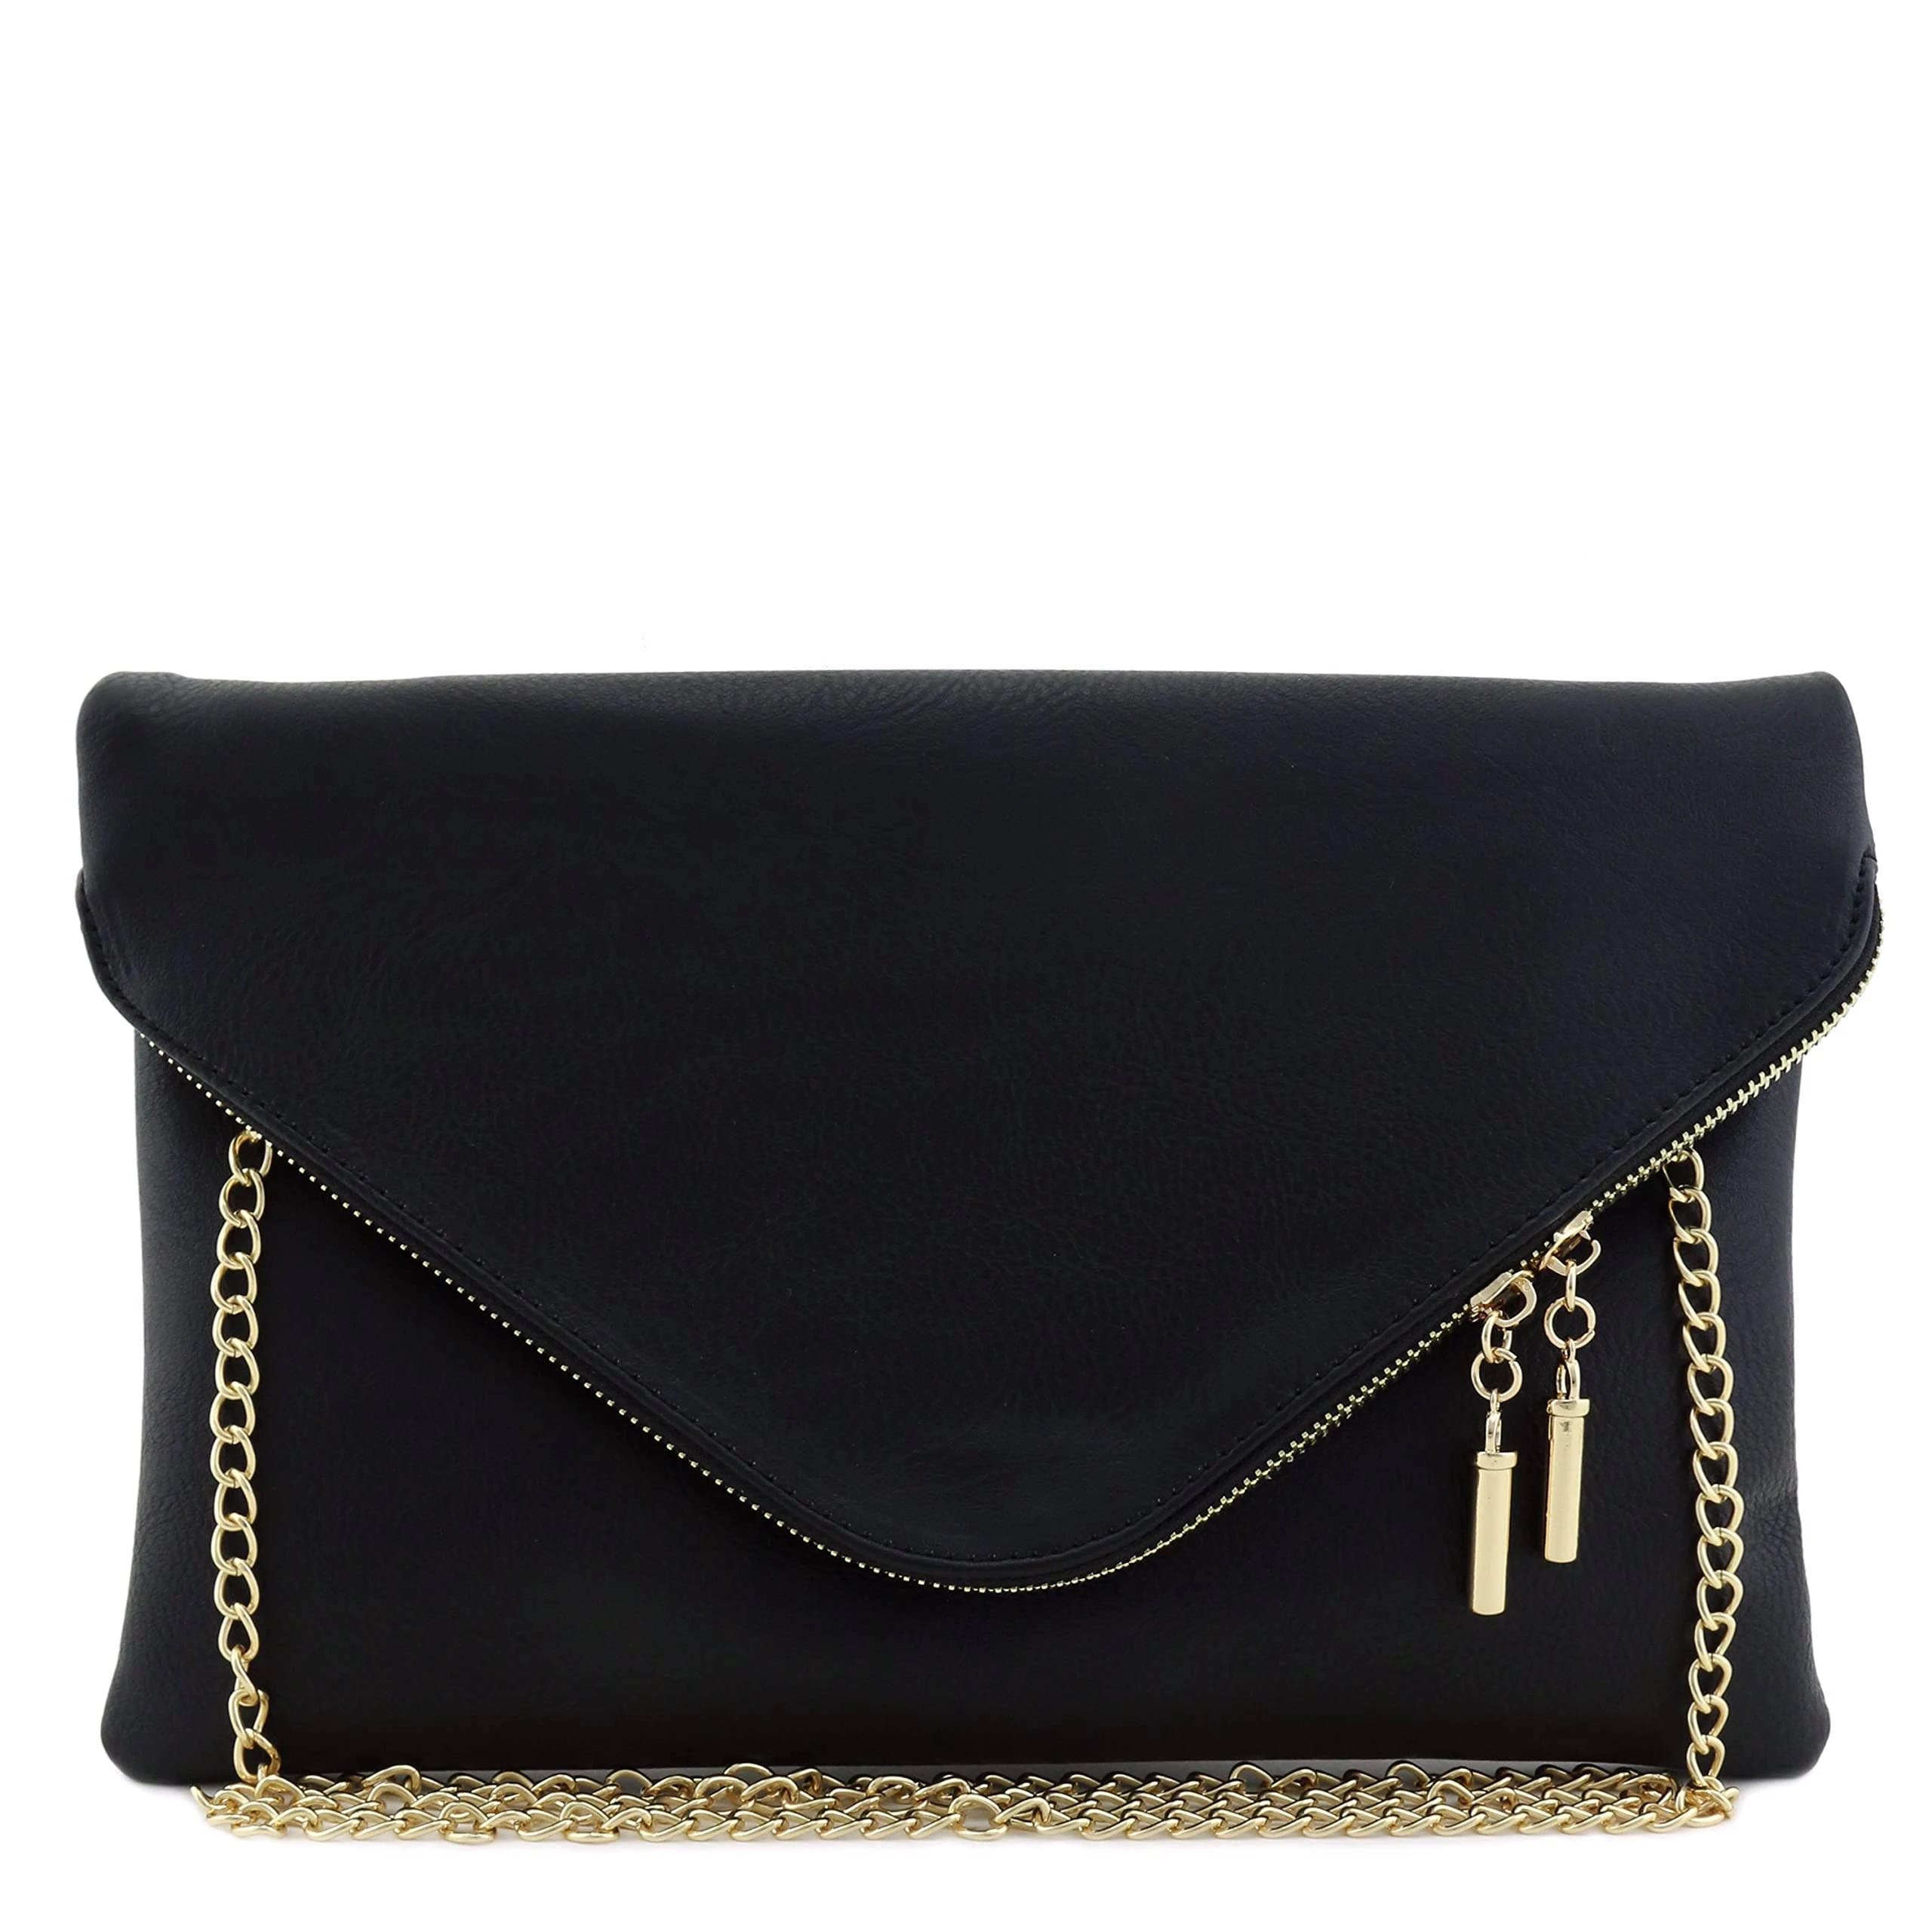 Chic oversized black envelope clutch with chain strap | Image